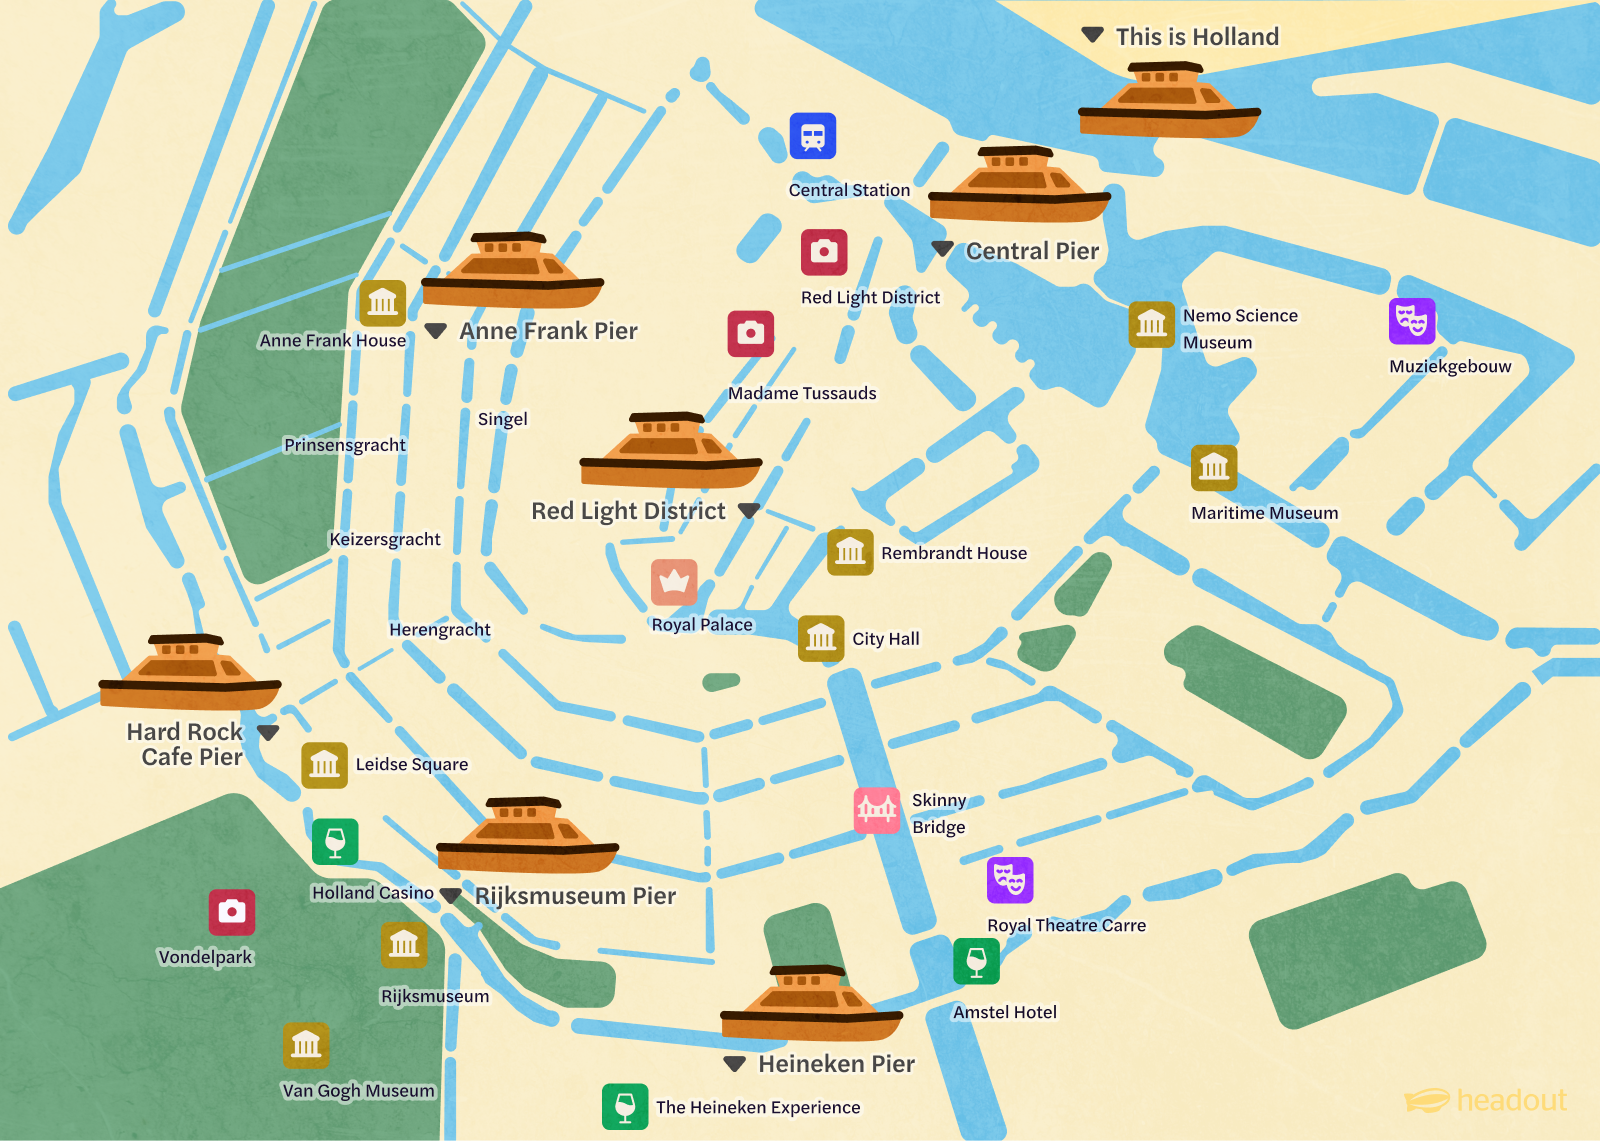 amsterdam canal cruise best